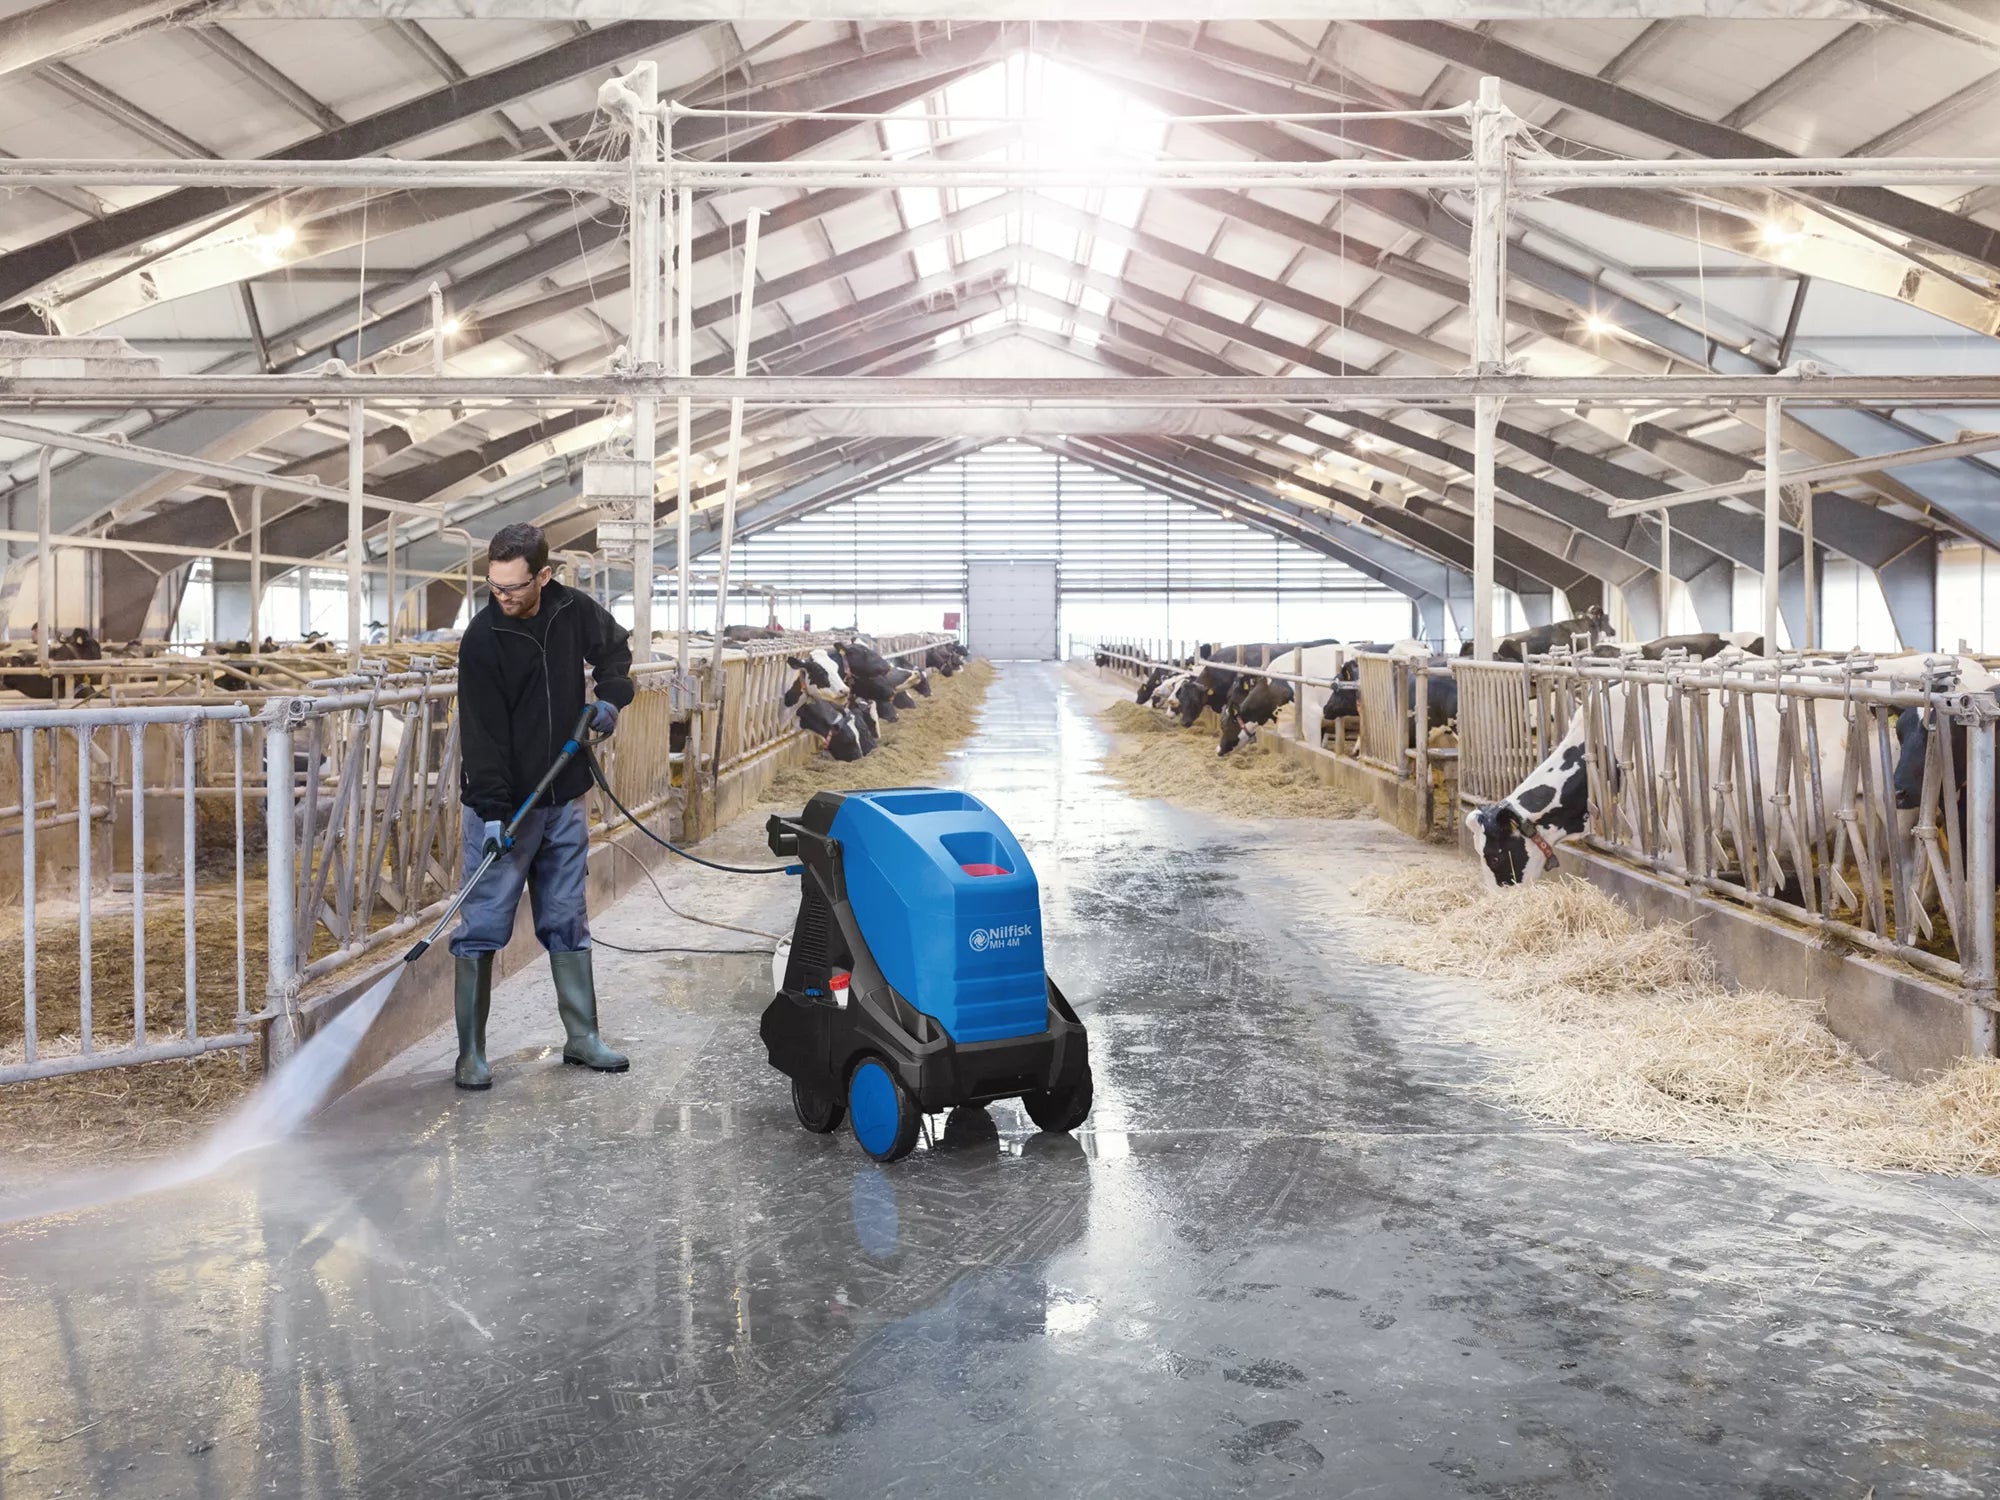 Nilfisk Industrial Pressure Washer in Action on a Farm